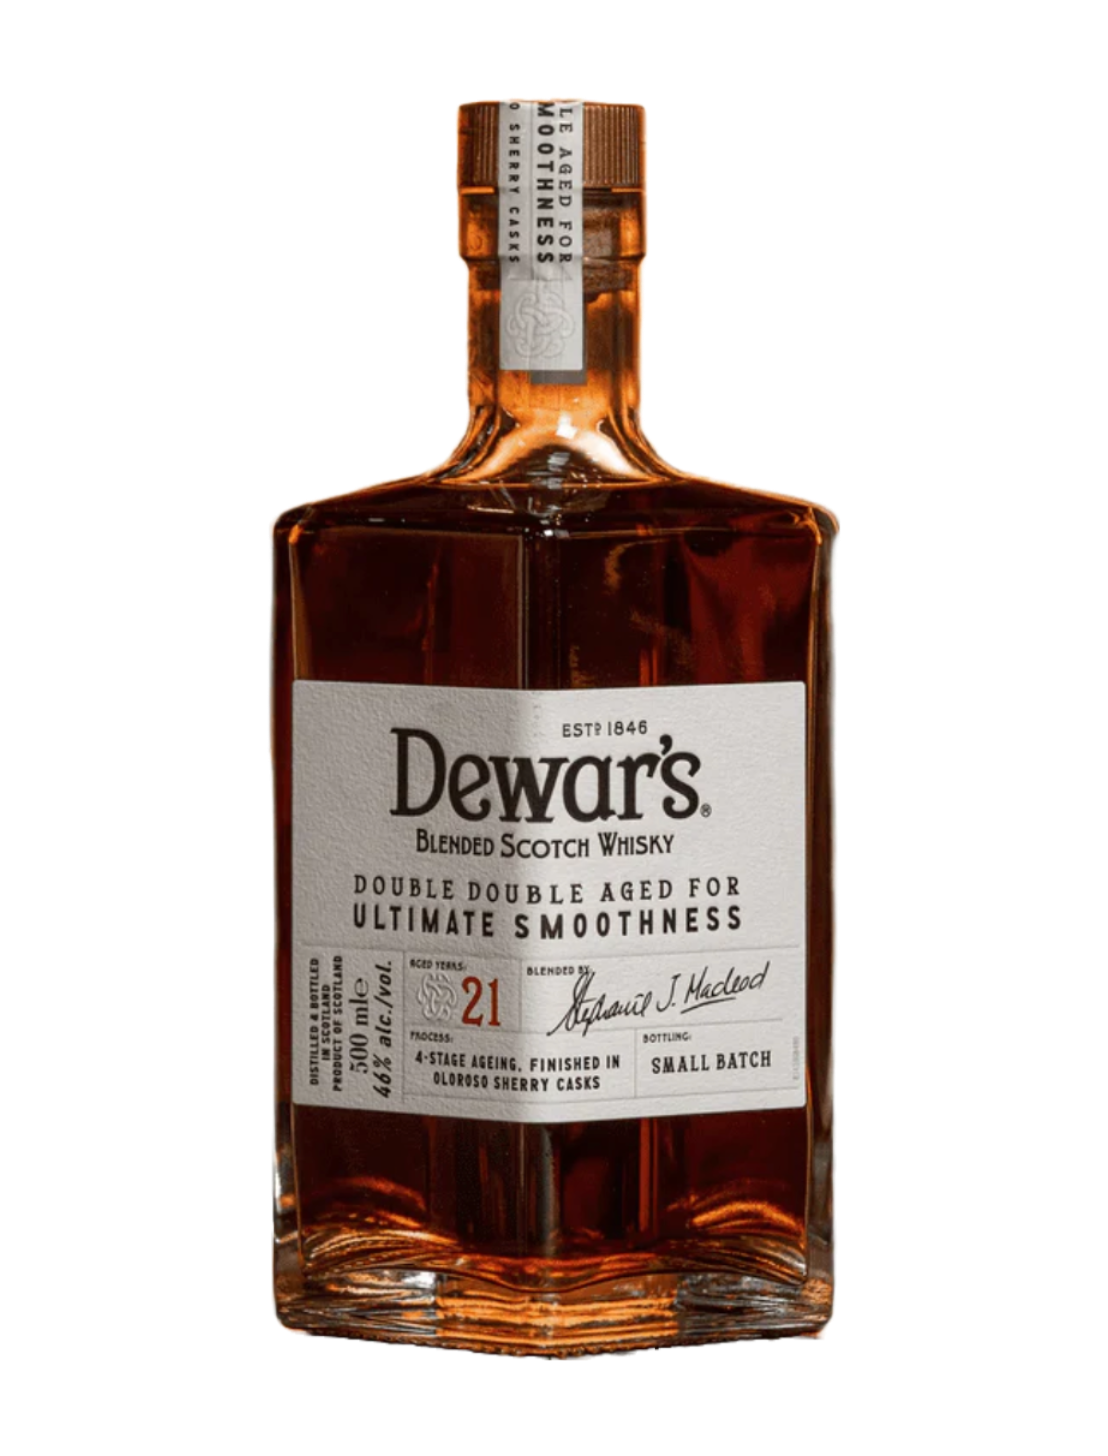 An elegant bottle of Dewars Double Double 20 Scotch in front of a plain white background